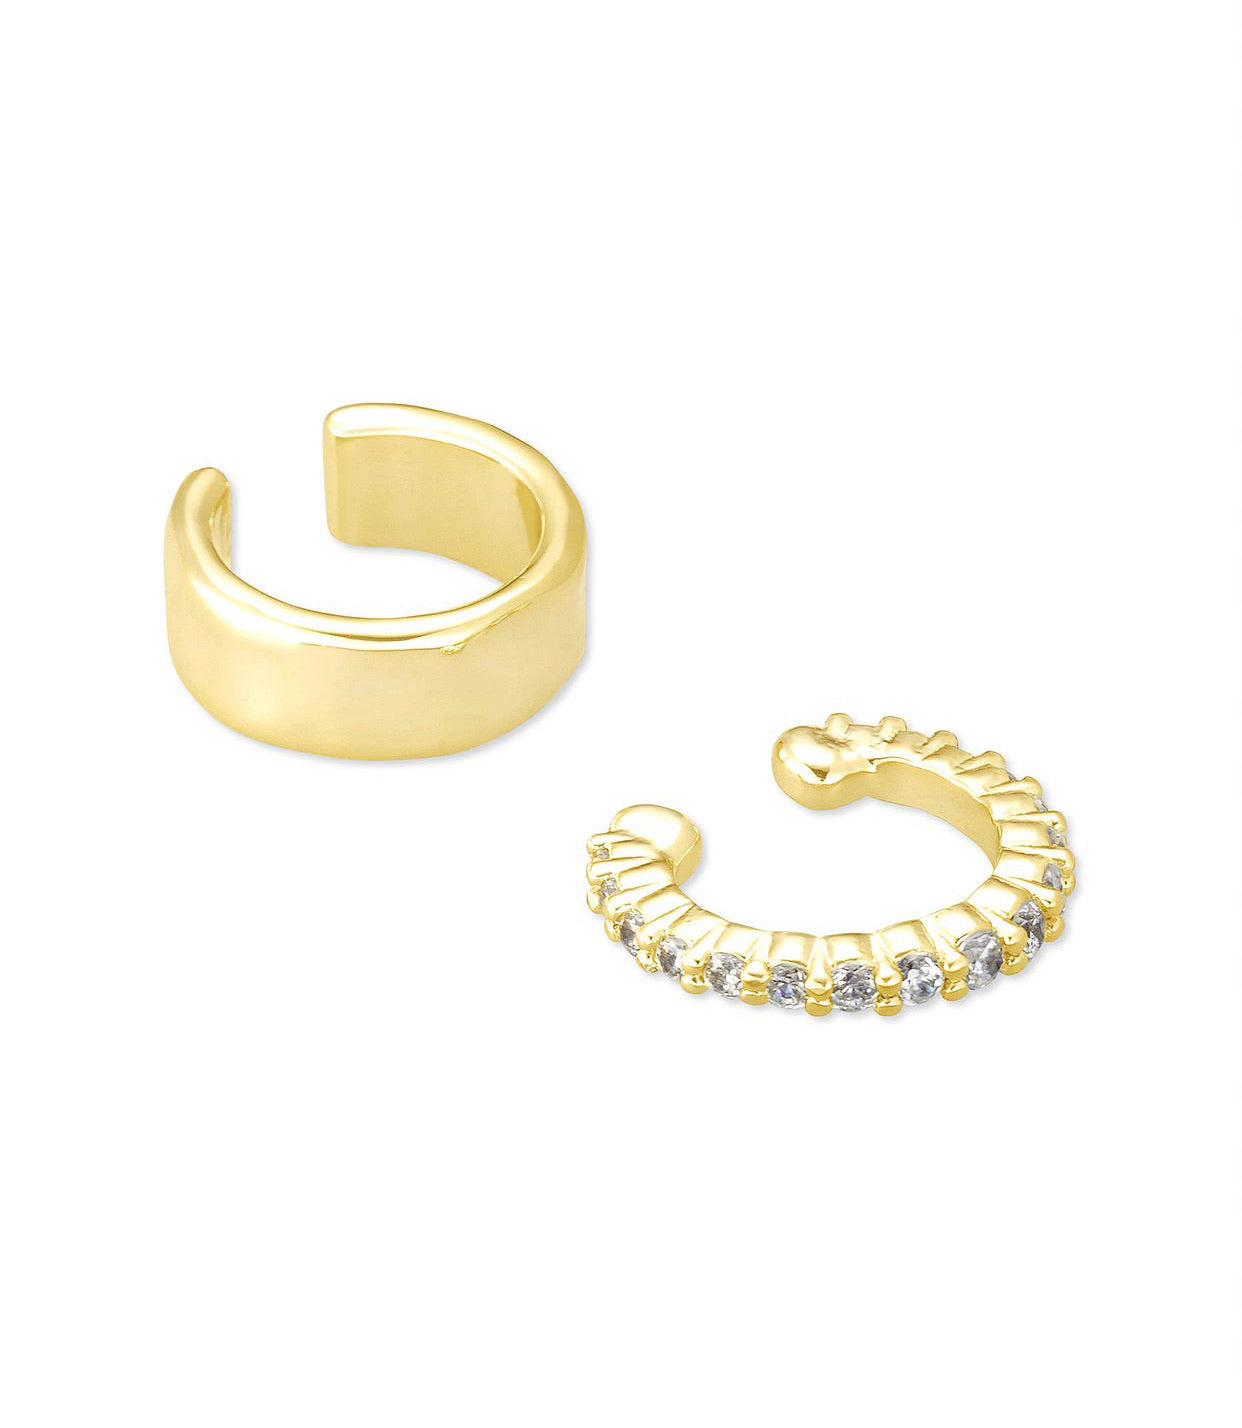 Kendra Scott Selena Ear Cuff - Available in 2 Colors